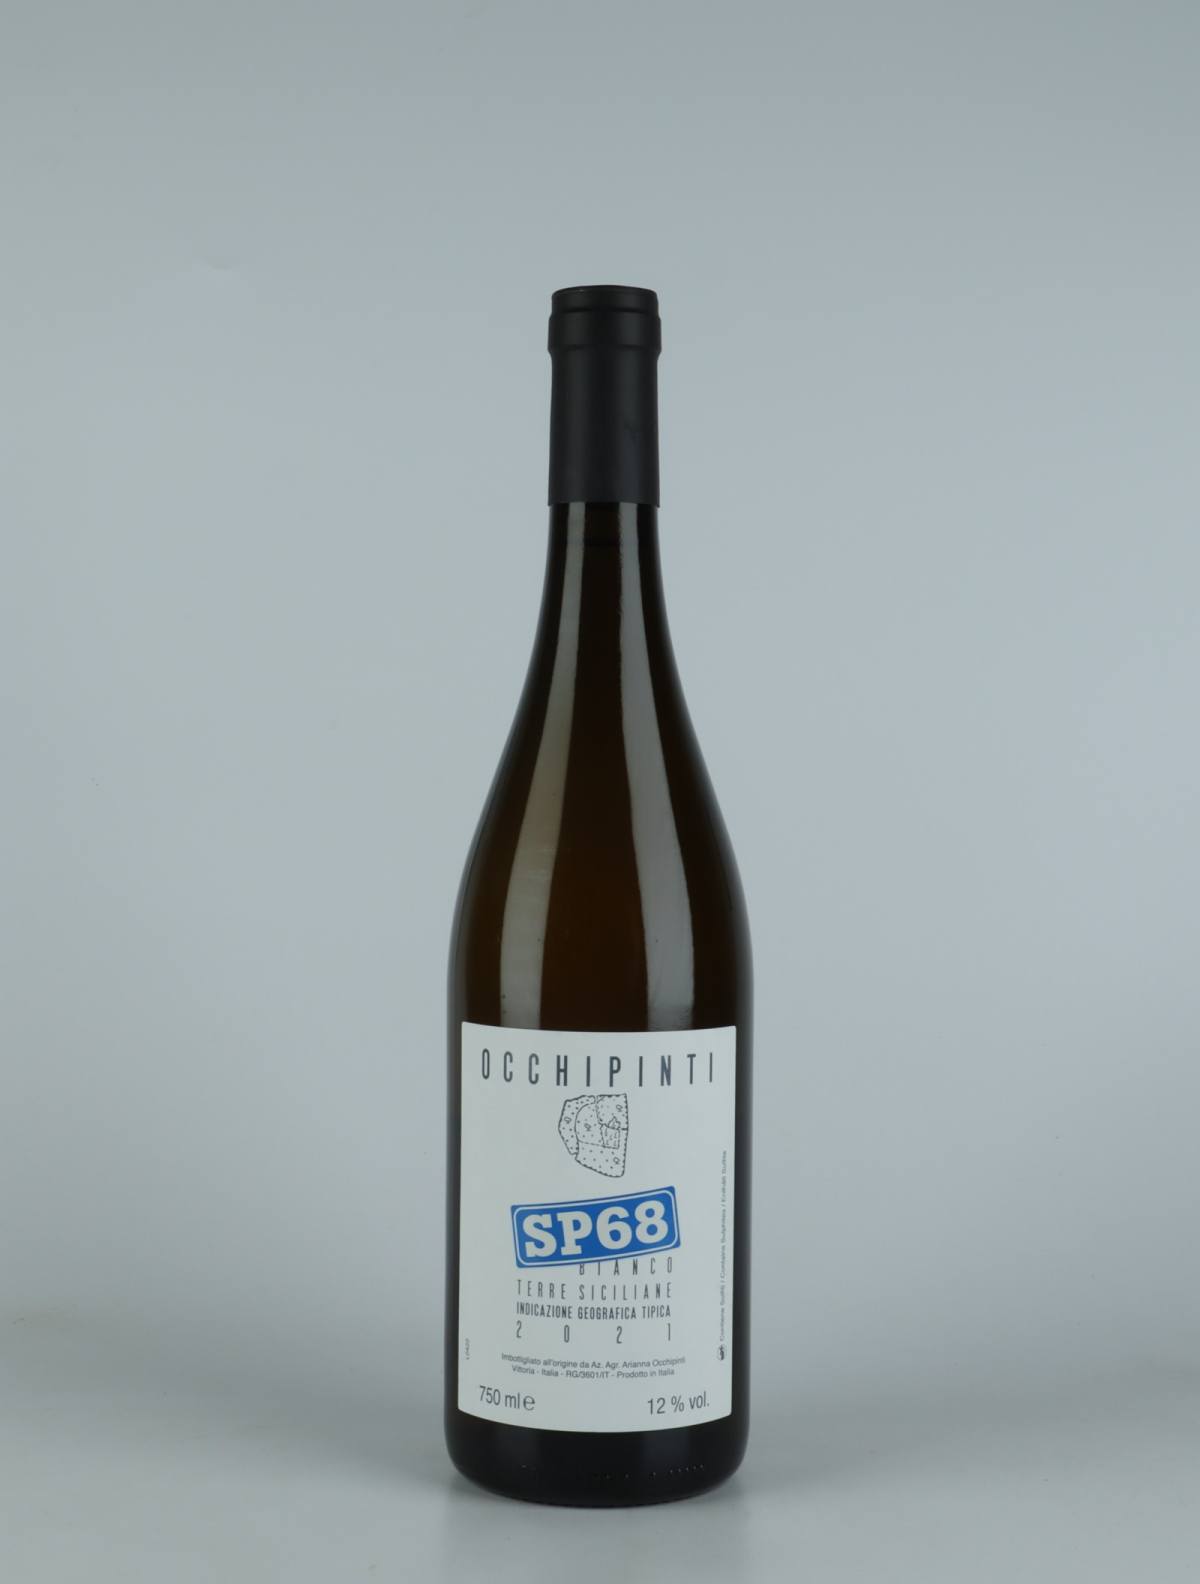 A bottle 2021 SP68 Bianco White wine from Arianna Occhipinti, Sicily in Italy